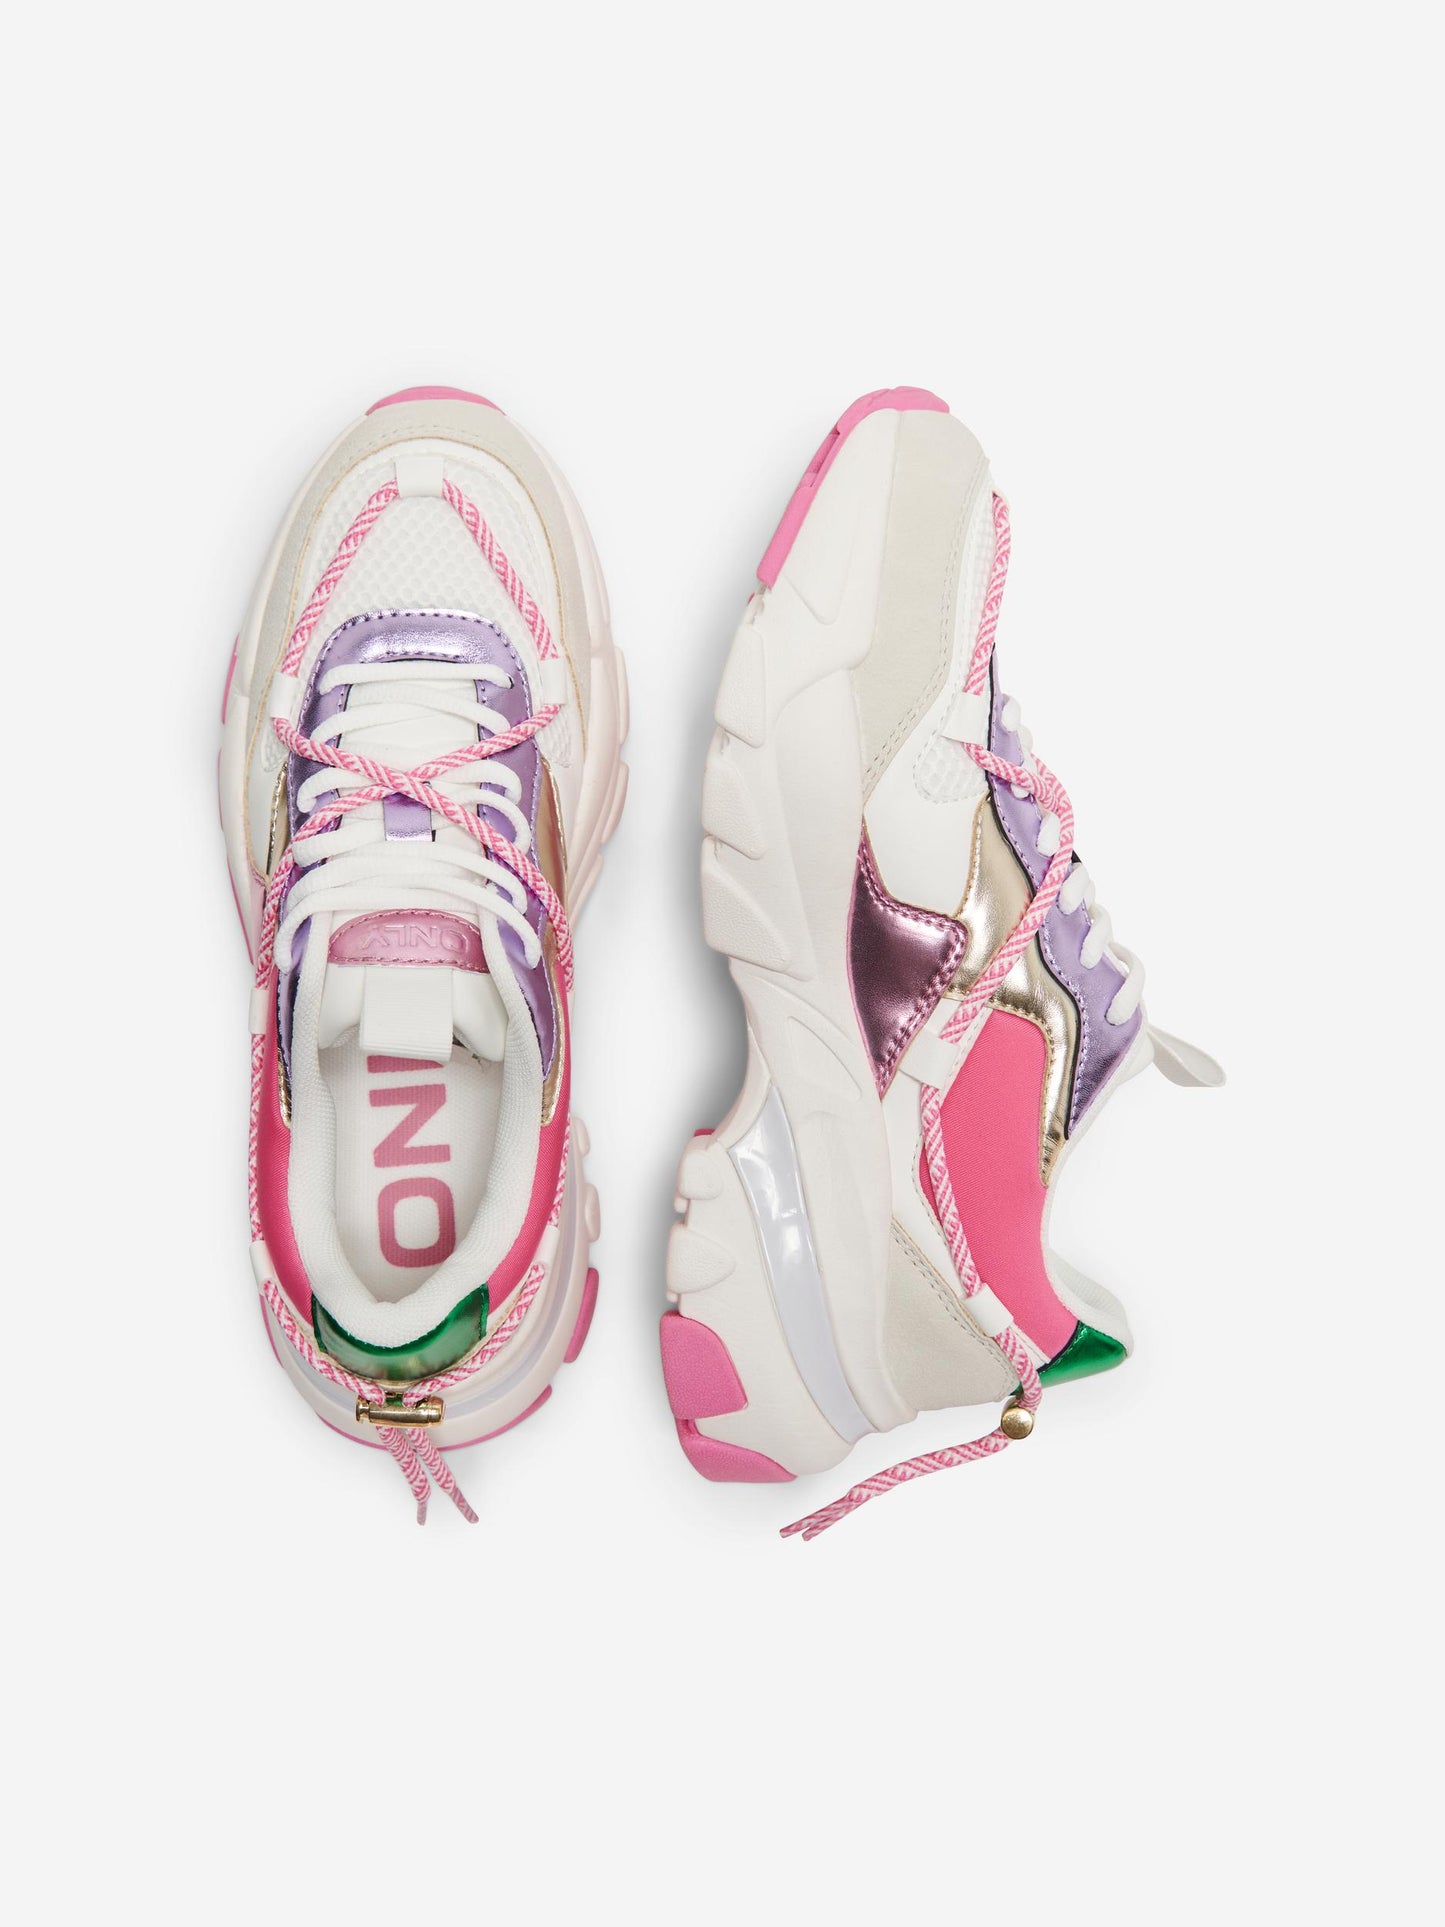 Only - Chunky Textured Pink and White Trainers